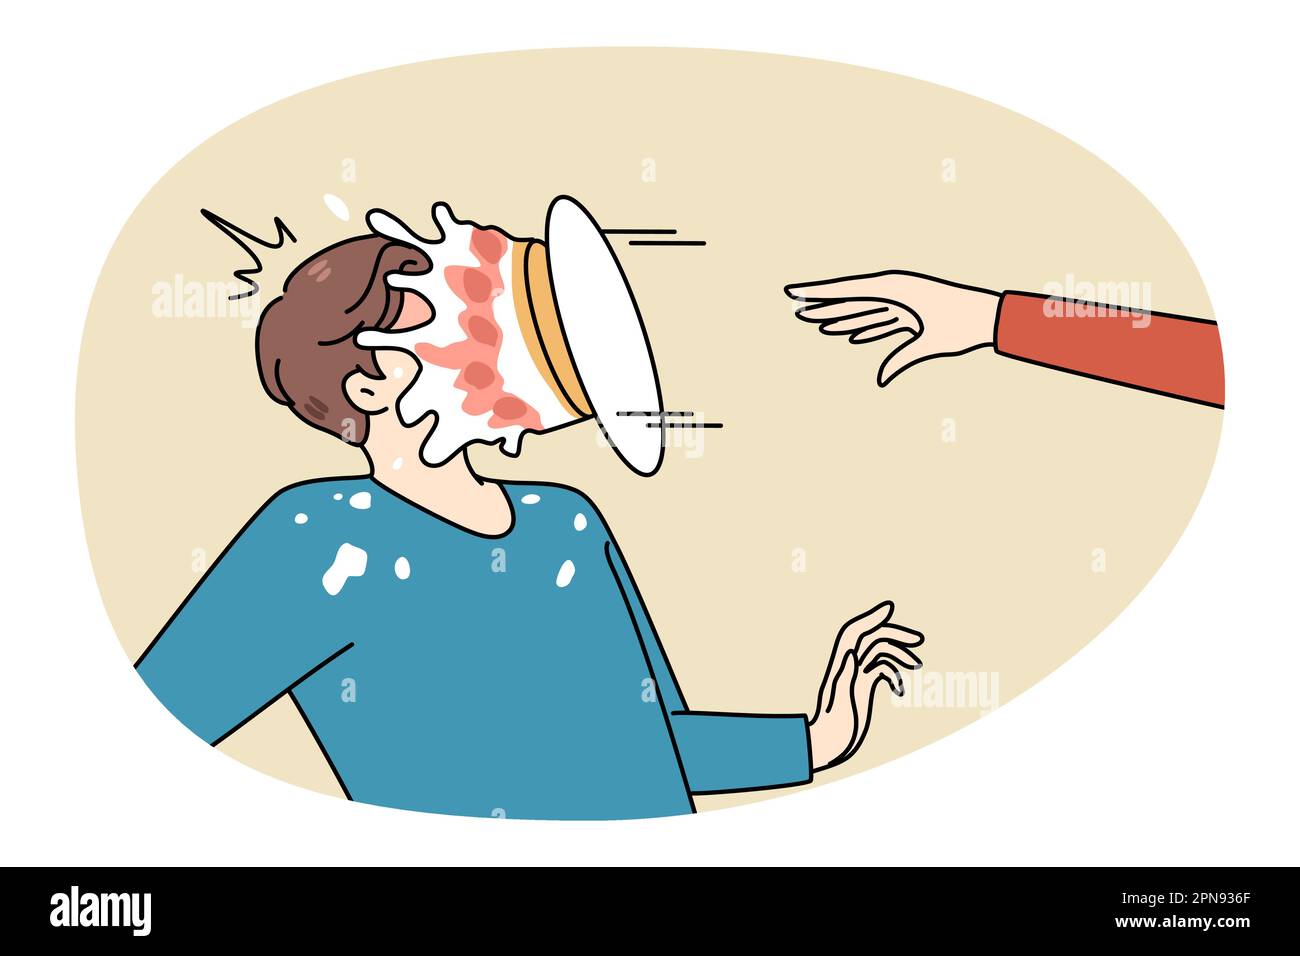 Person throw pie in man face make fun of friend or colleague. Greeting or congratulation with happy birthday prank or joke. Laughter and smile concept. Flat vector illustration. Stock Vector